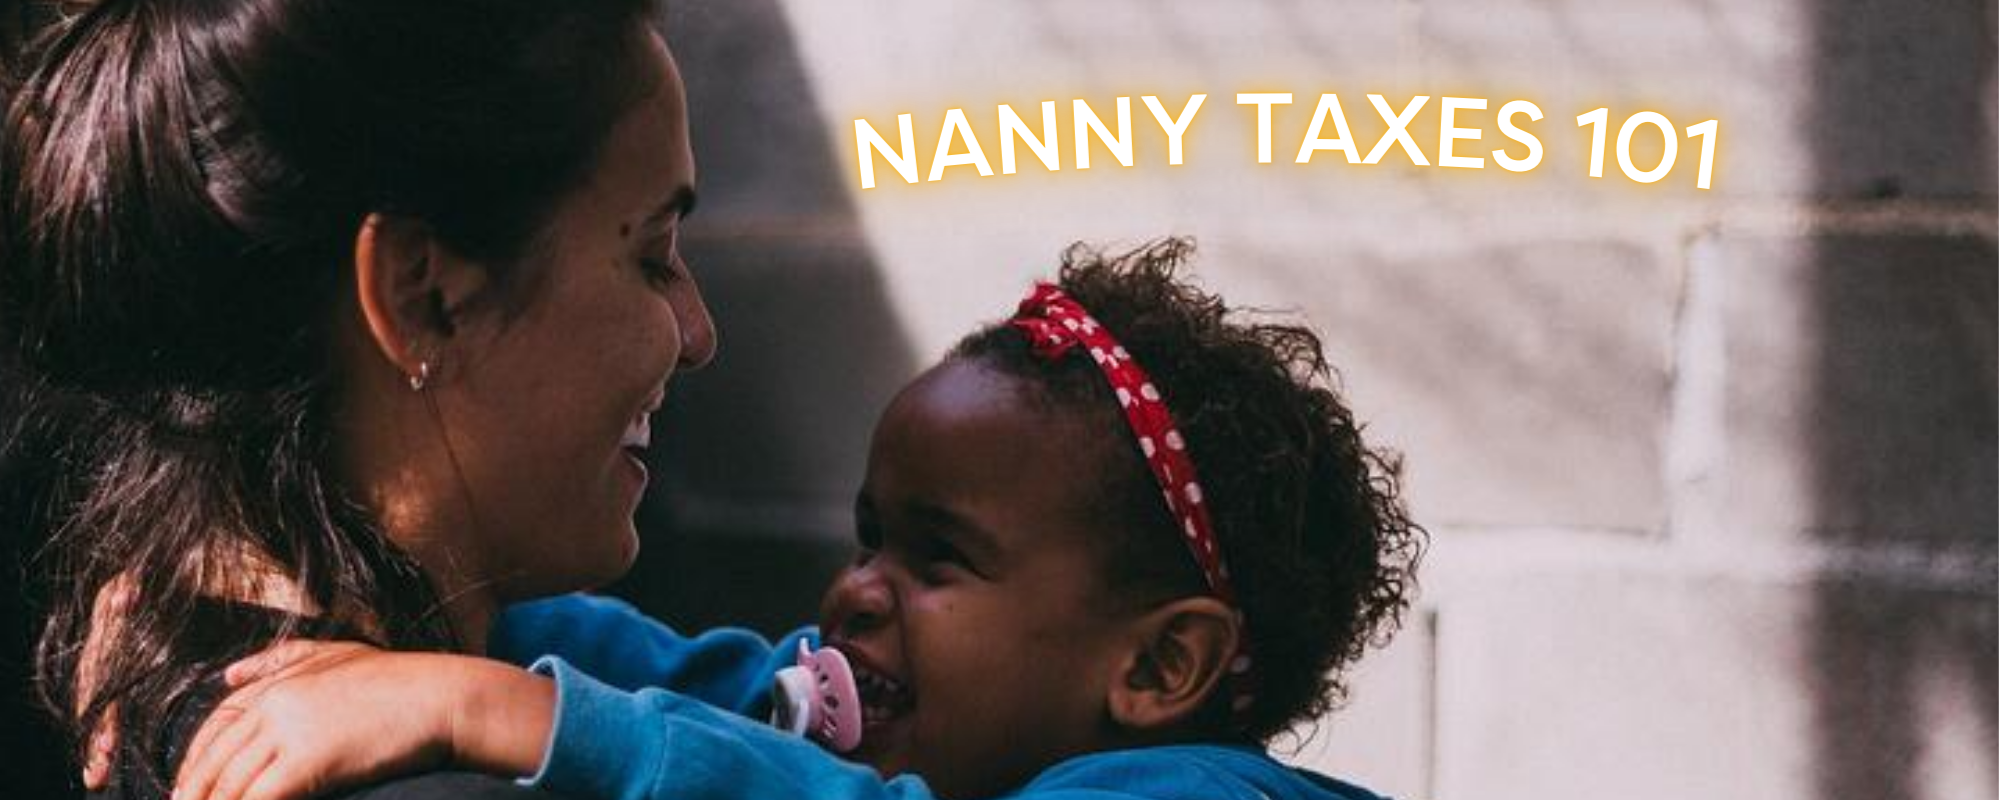 Everything you need to know about "The Nanny Tax"